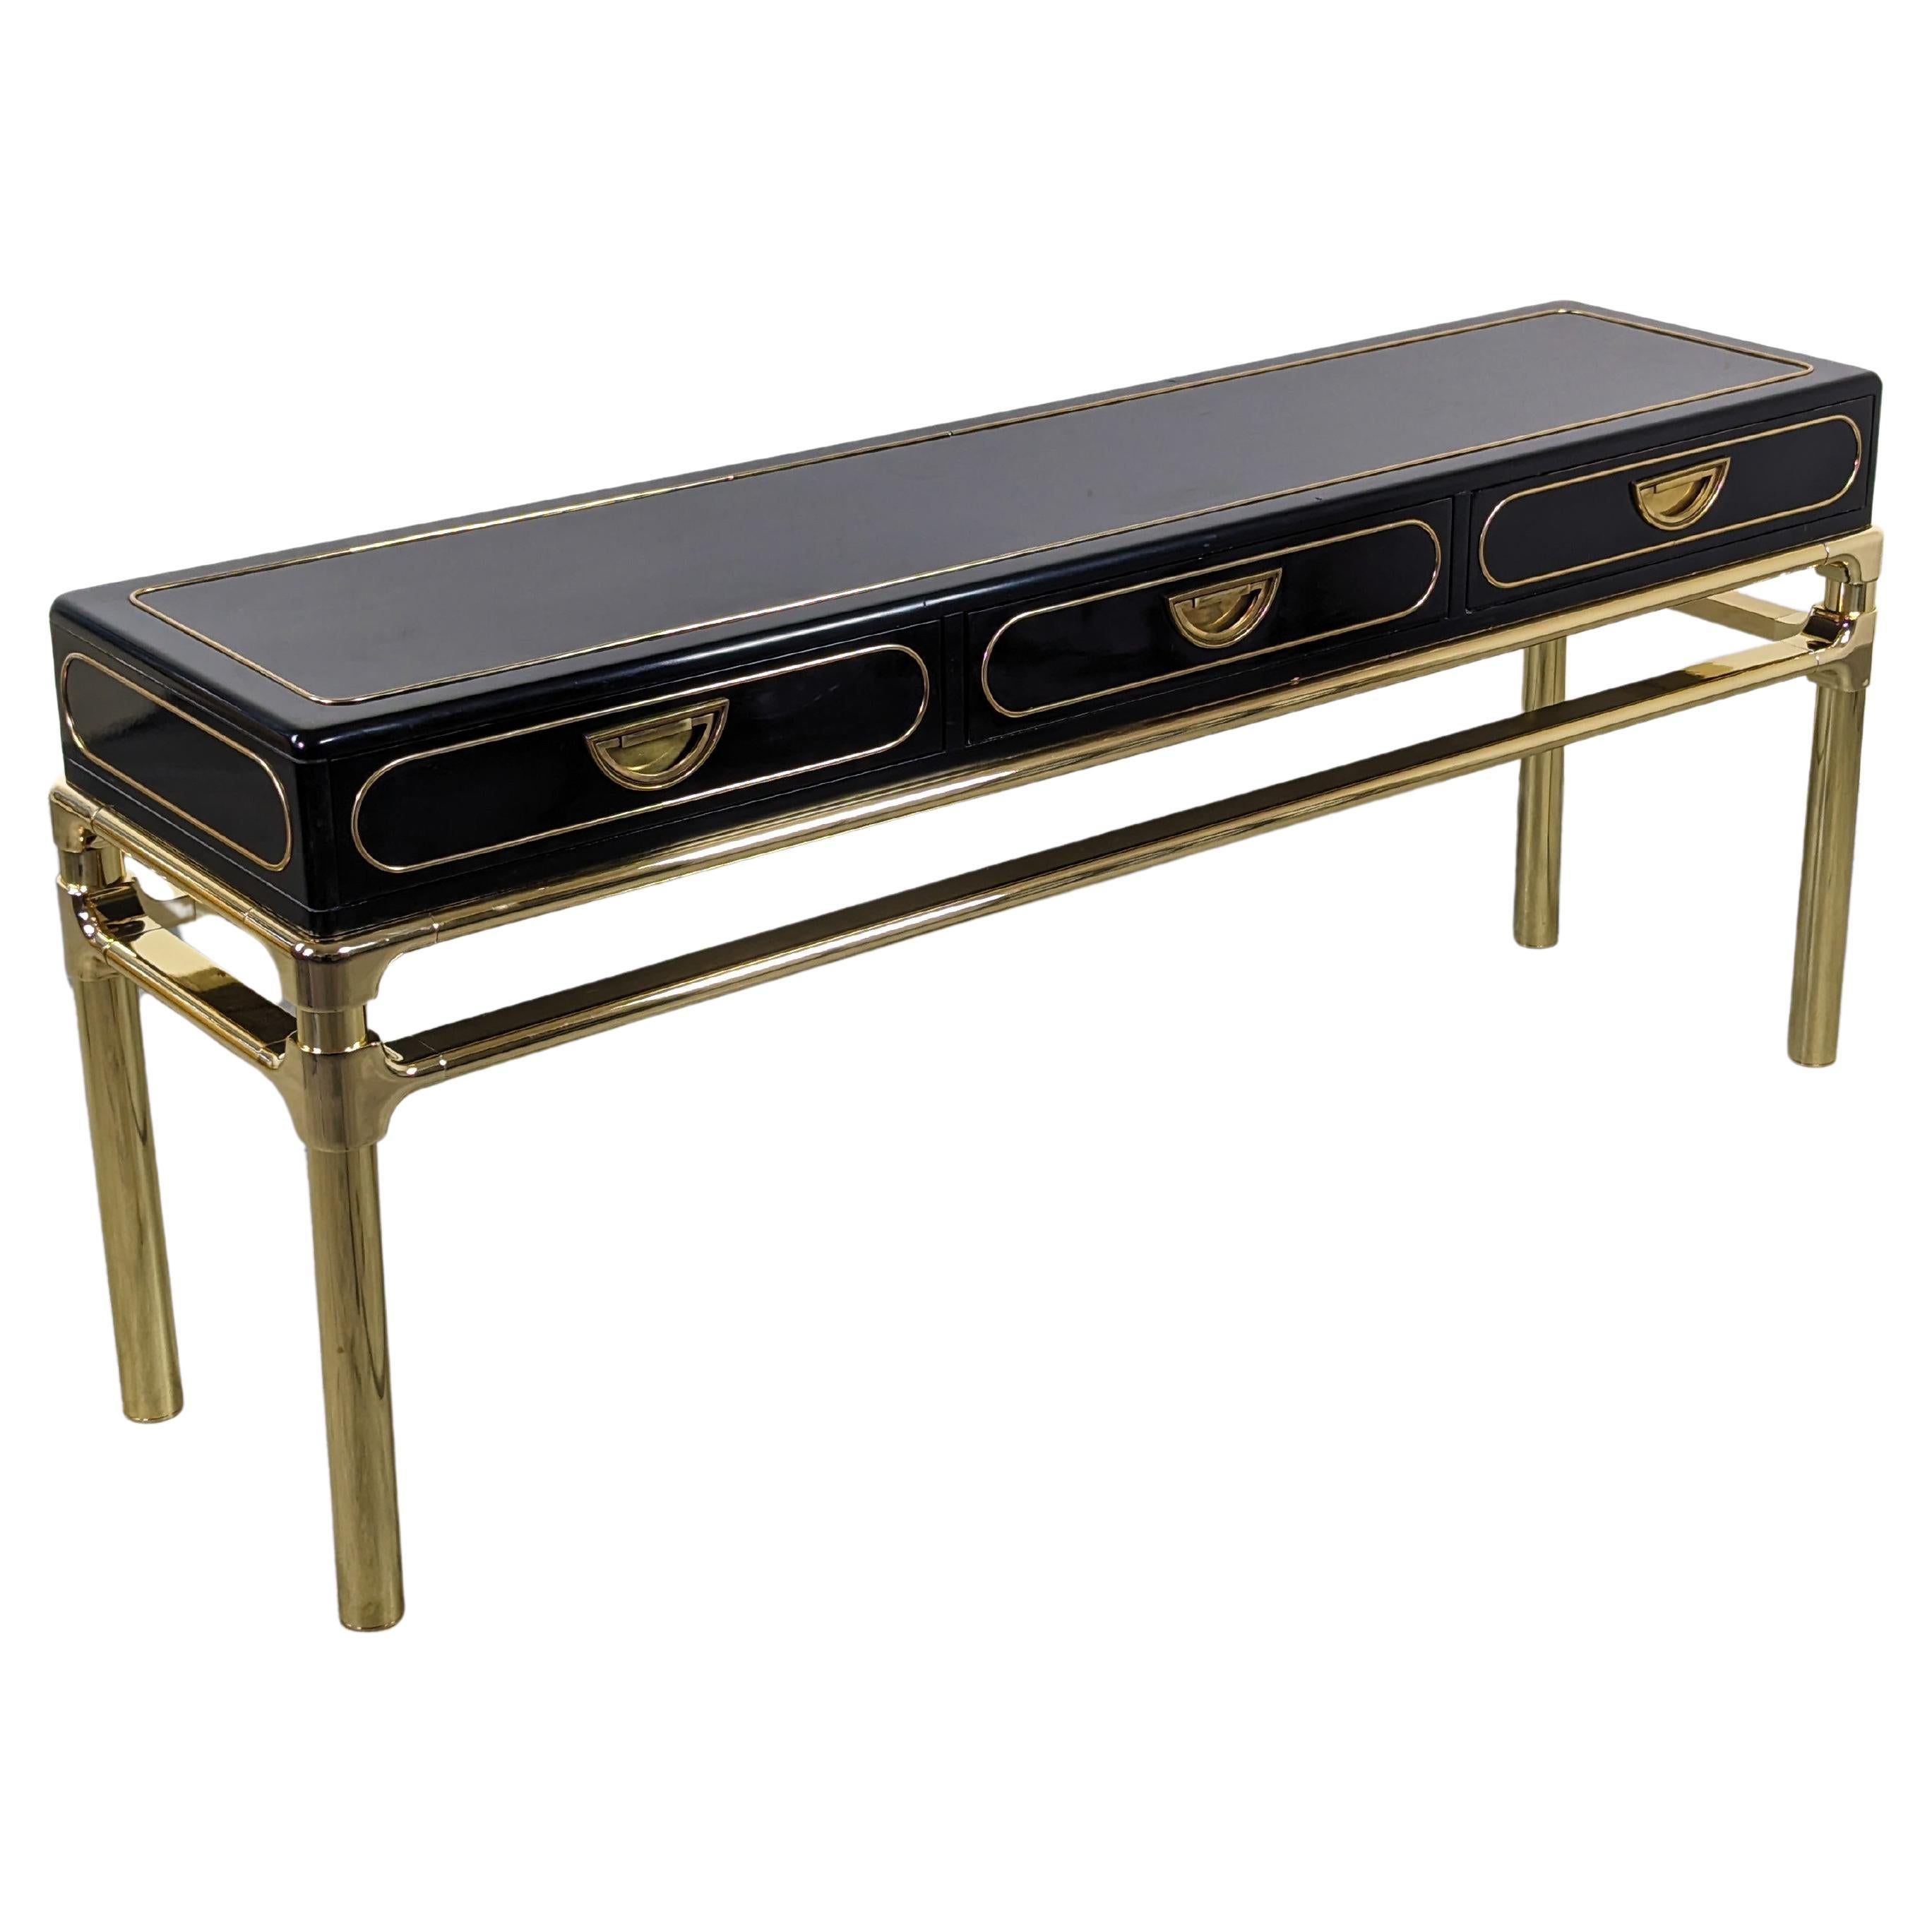 Brass and Black Lacquer Console Table With Drawers by Mastercraft, c1970s For Sale